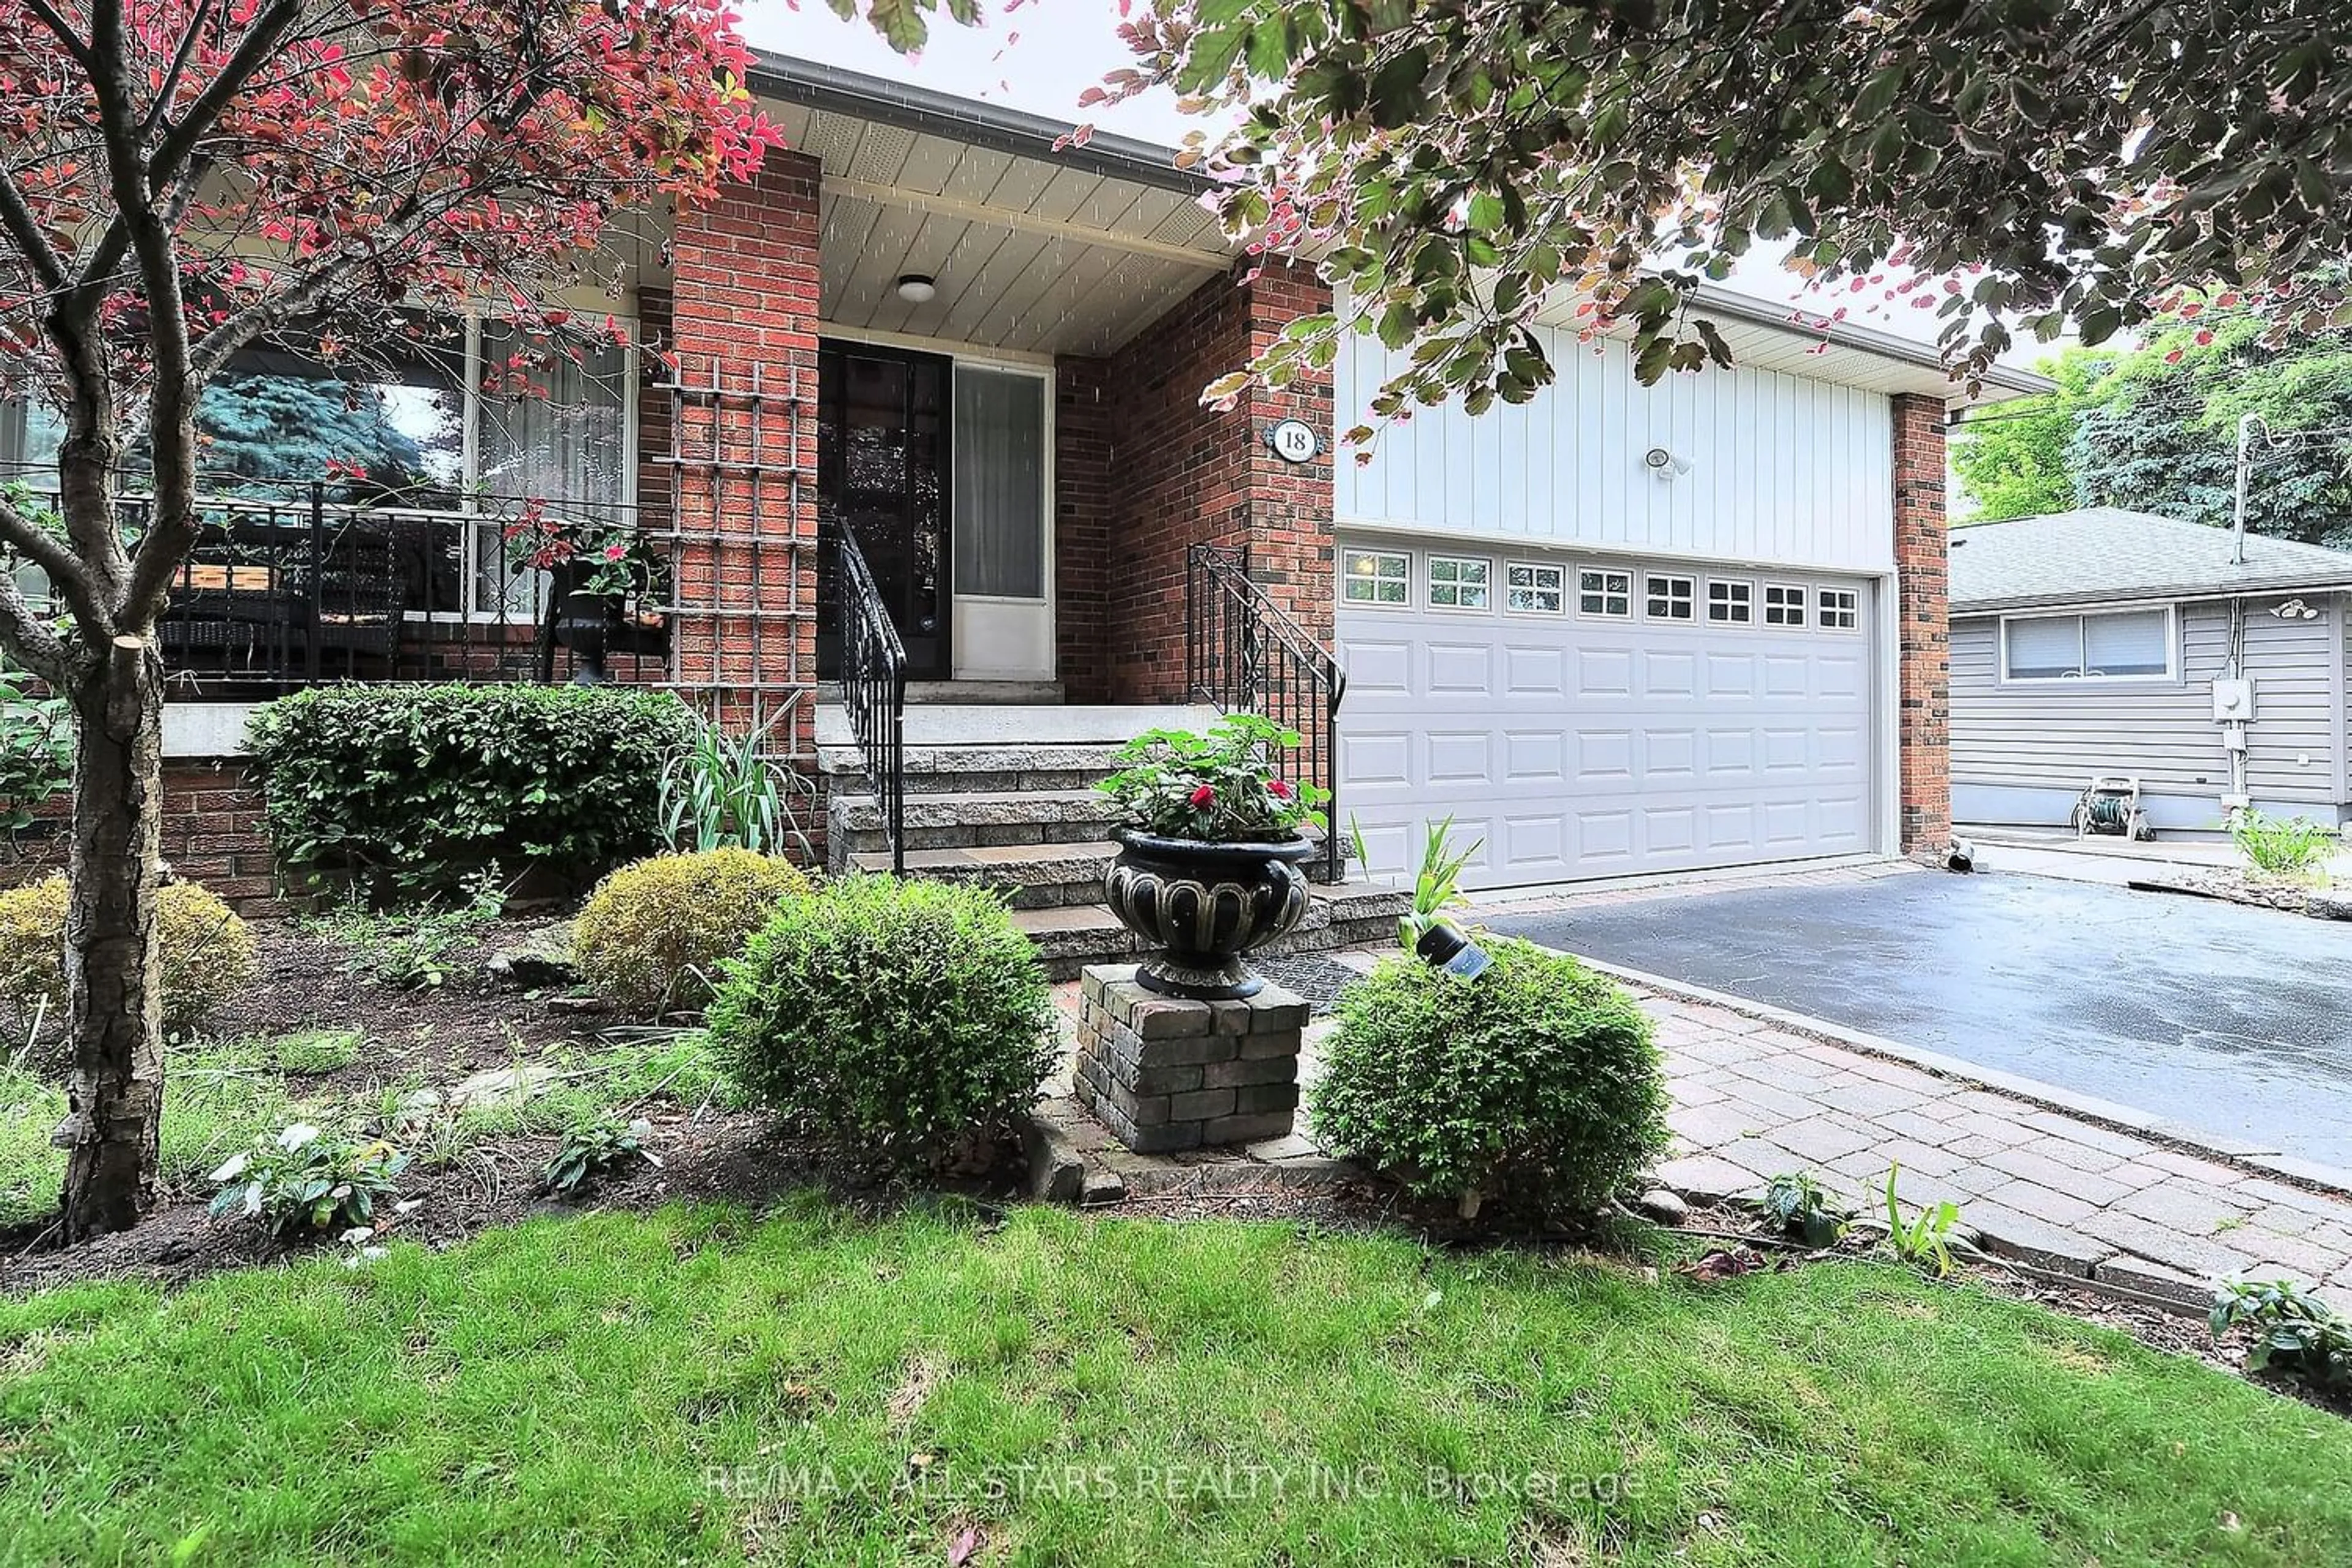 Home with brick exterior material for 18 Rouge St, Markham Ontario L3P 1K8